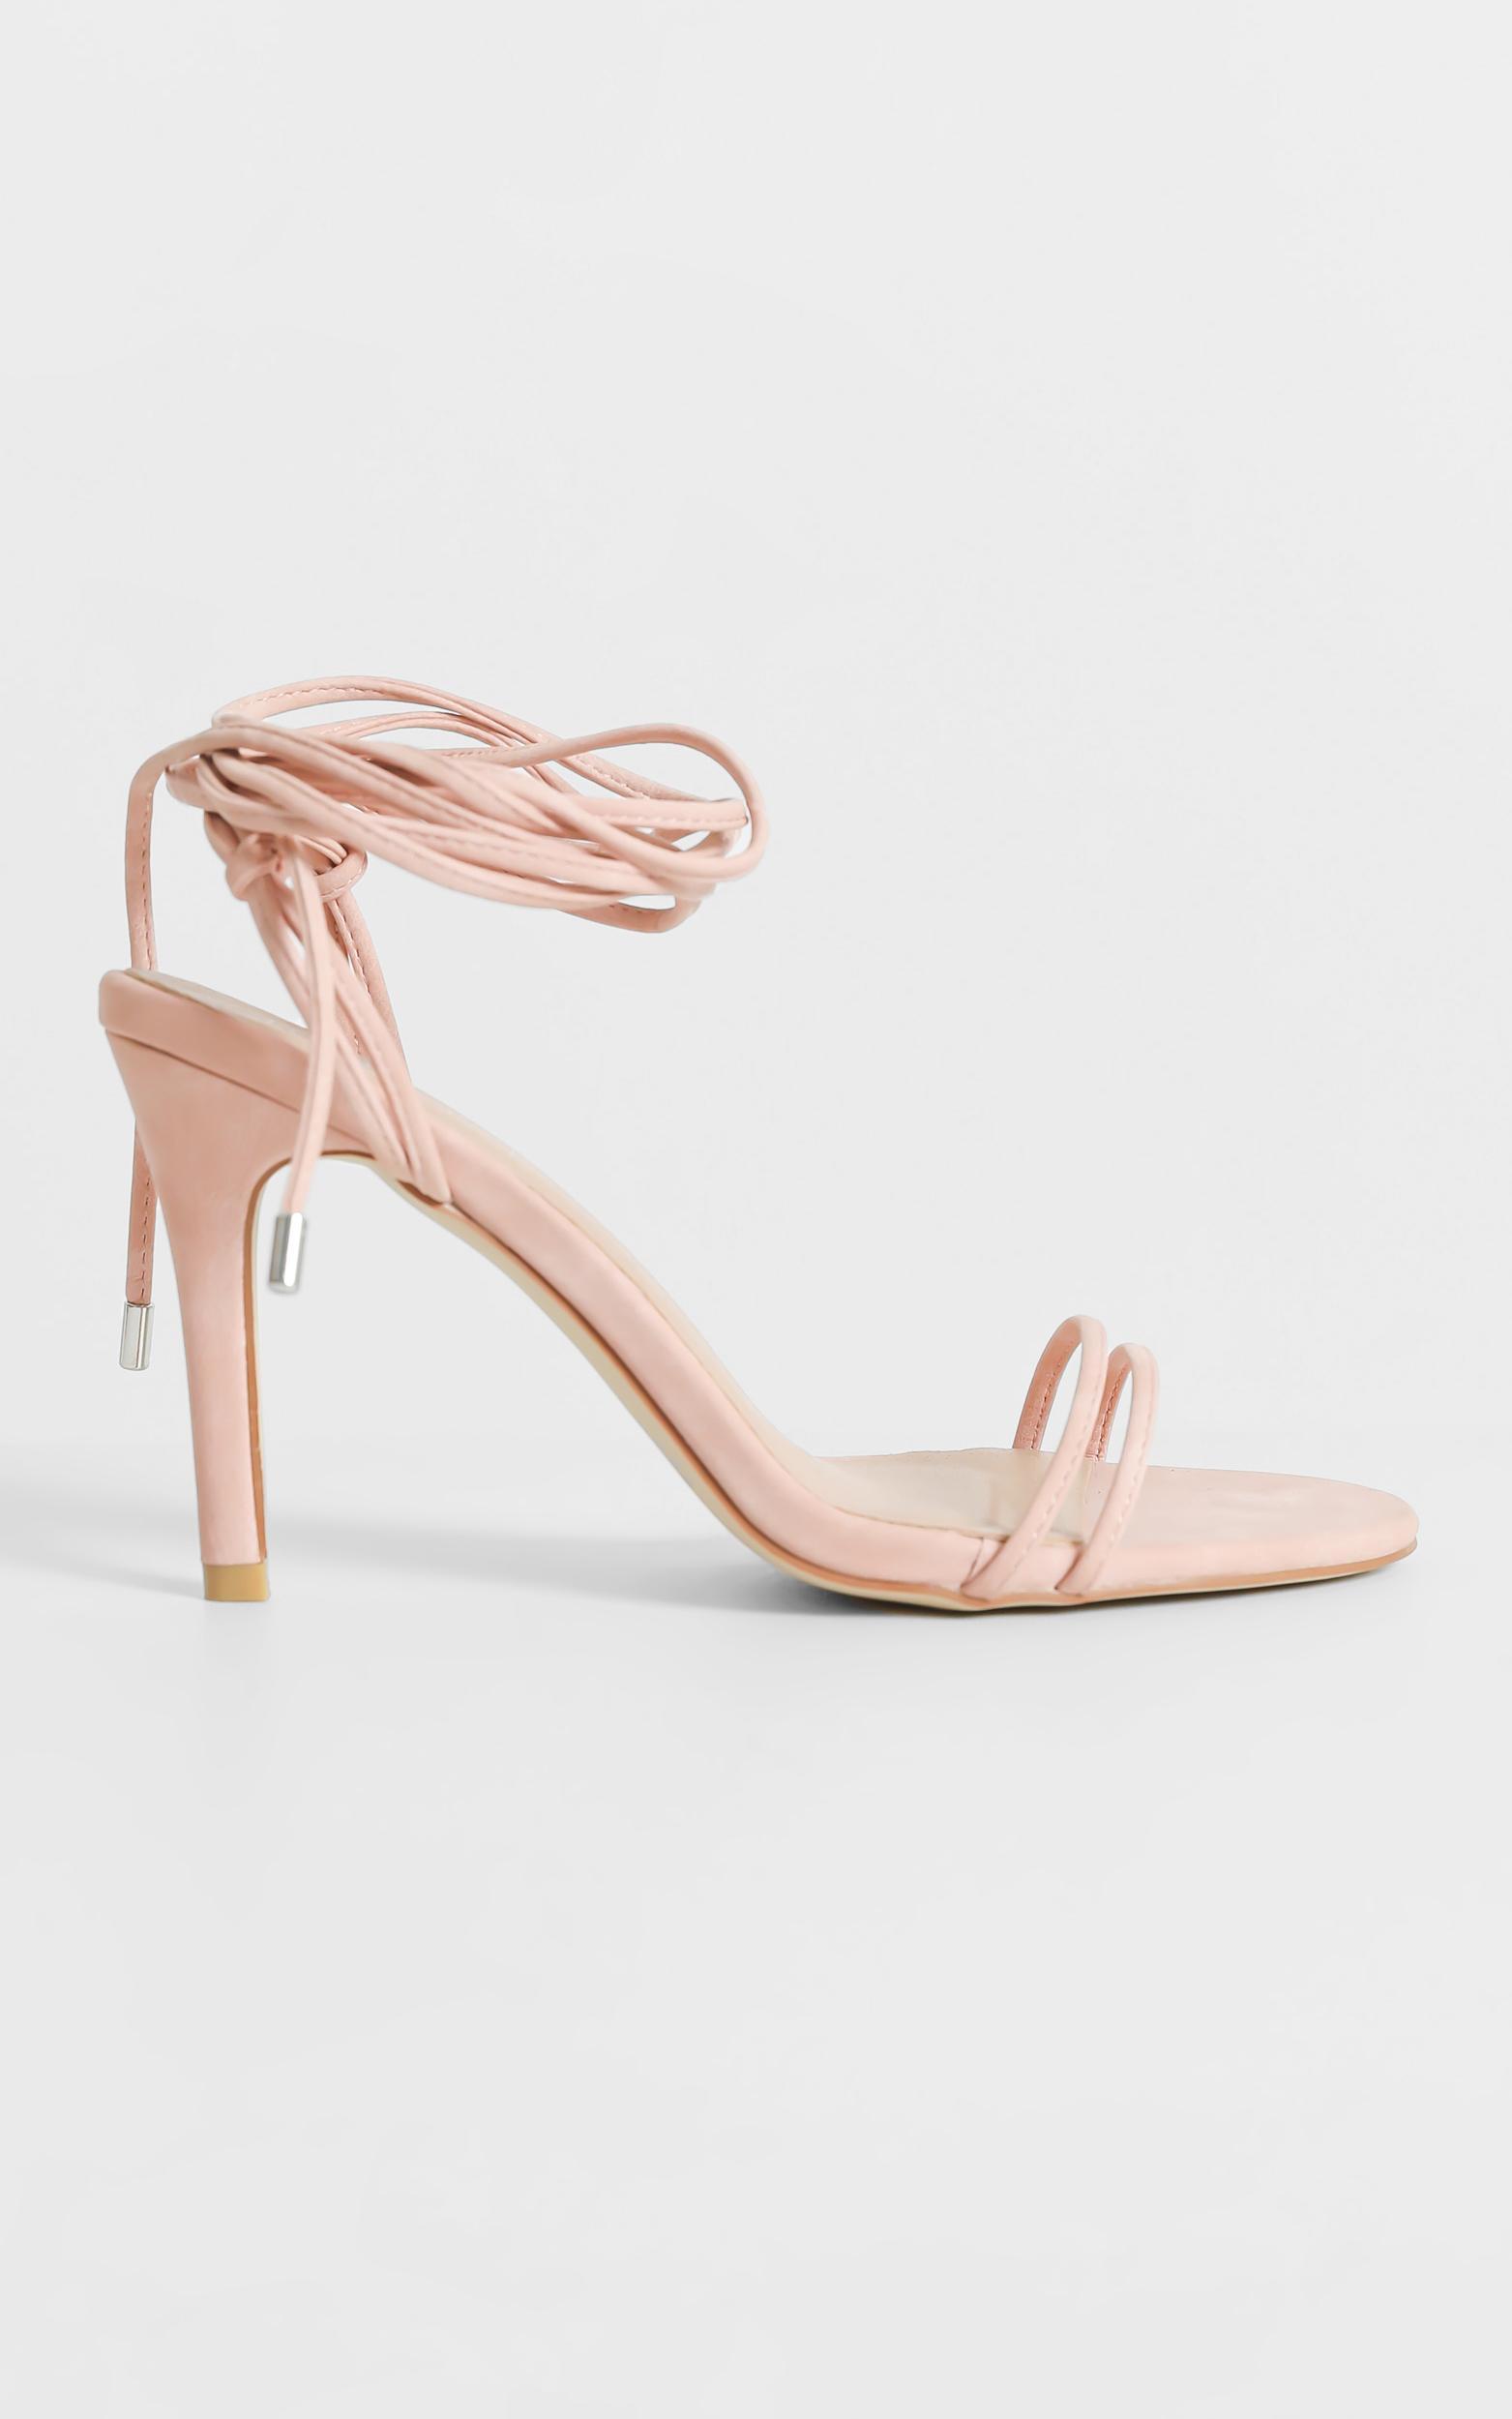 Therapy - Vibes Heels in Pastel Pink - 5, Pink, hi-res image number null